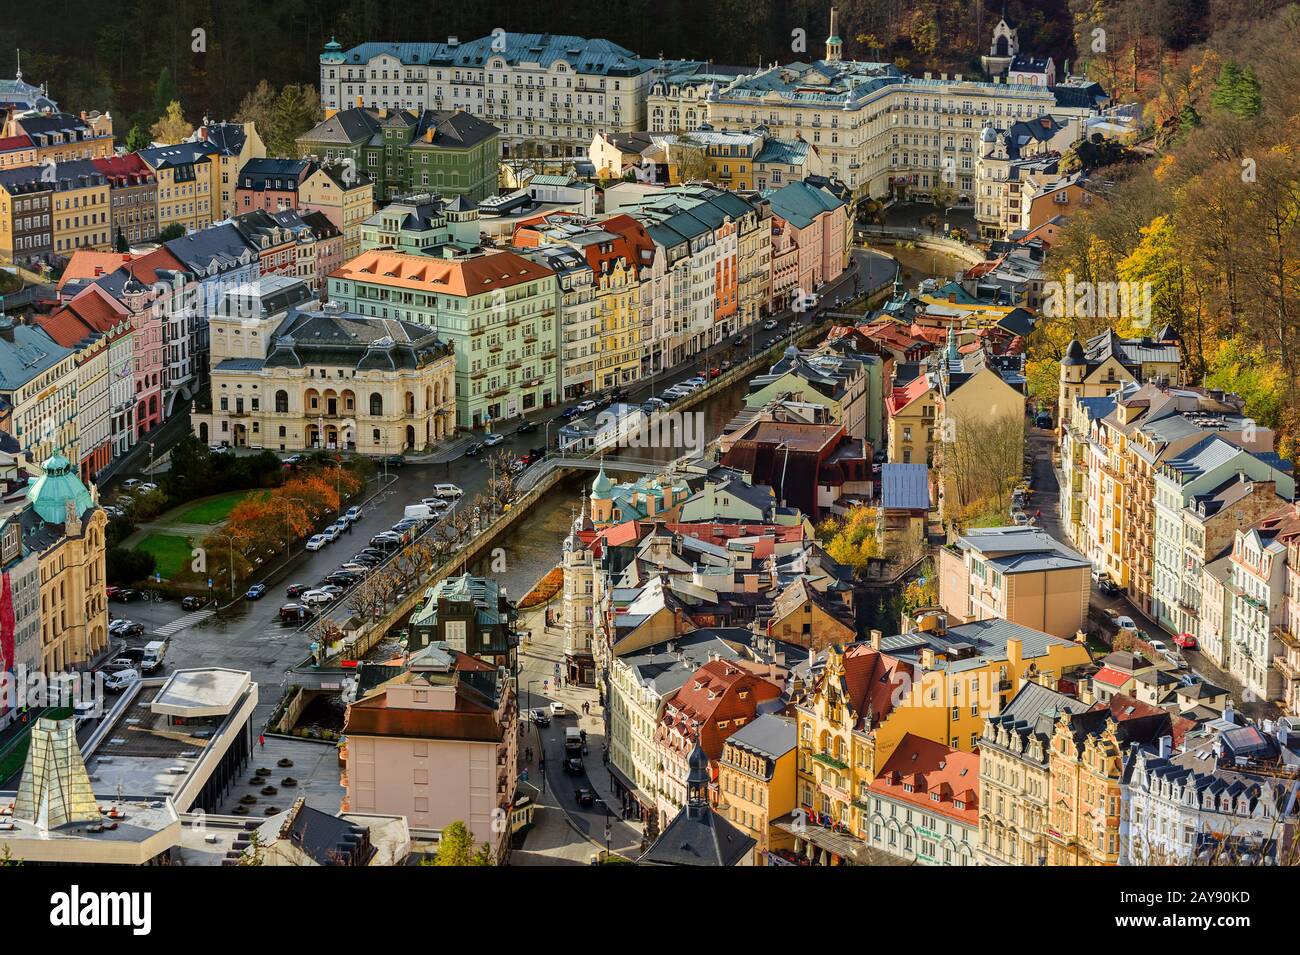 Karlovy Vary, Czech Republic - October 30, 2017: Embankment in the center of the city Stock Photo